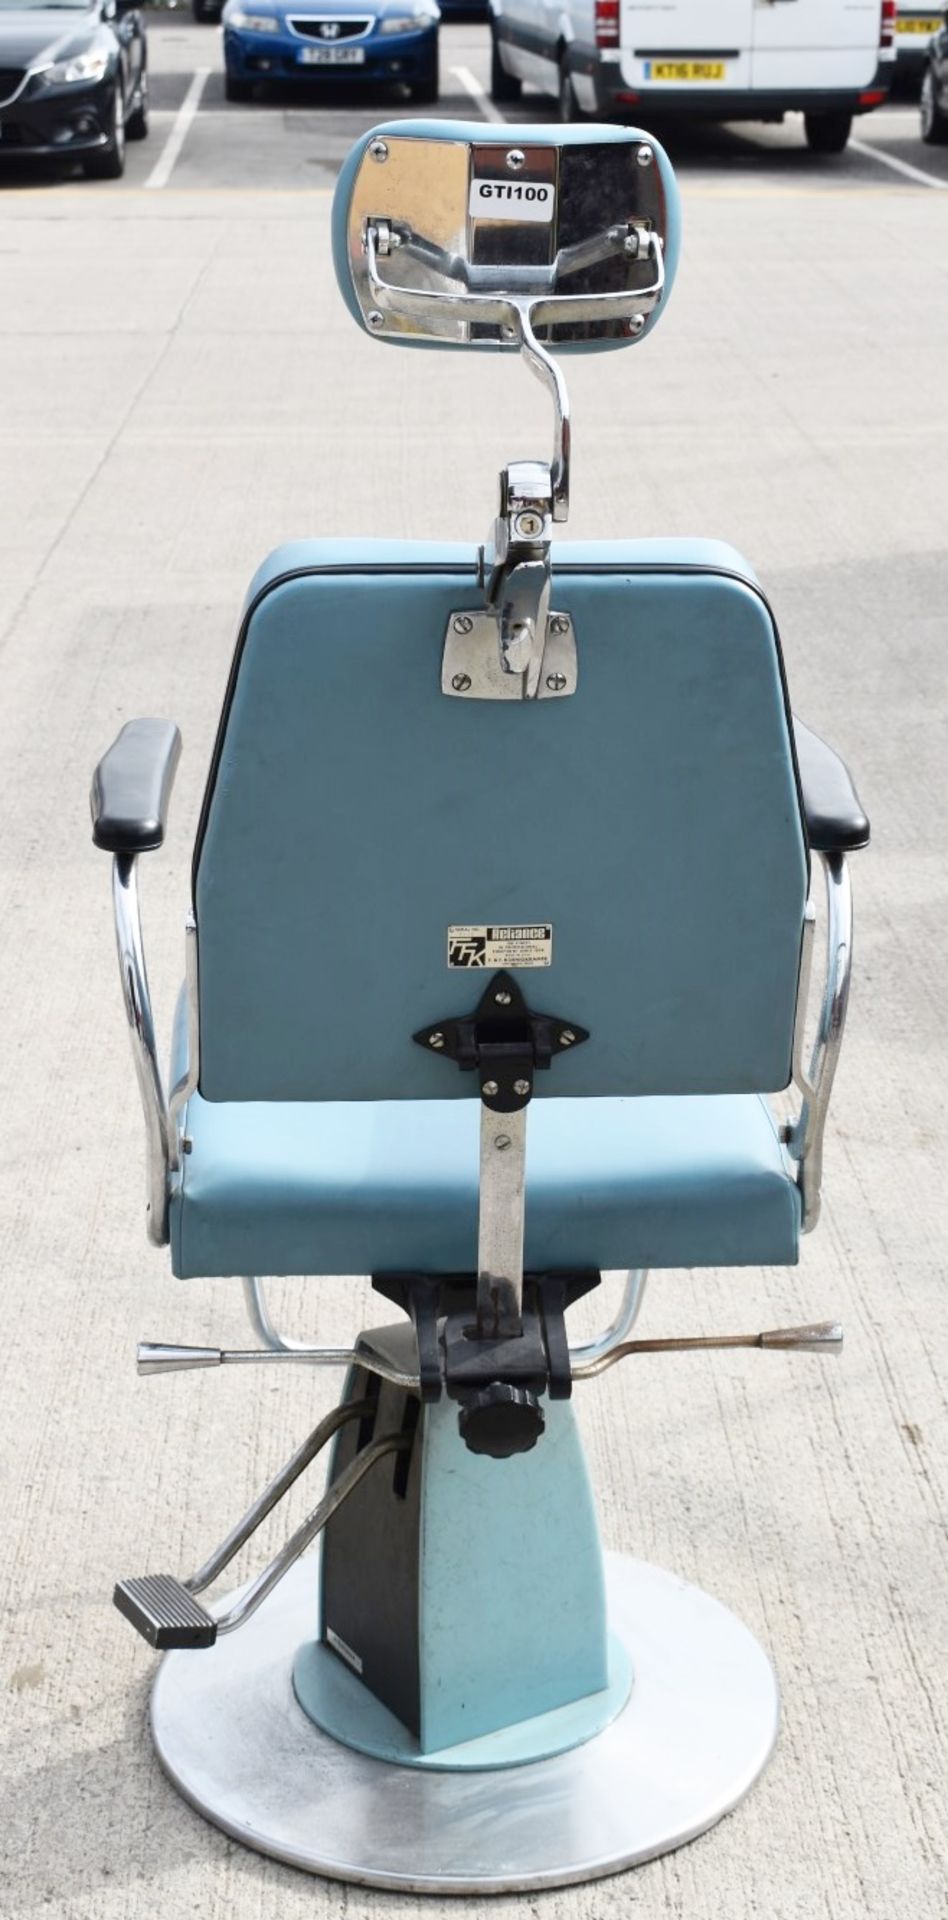 1 x Vintage F&F Koenigkramer Examination Chair With Gas Lift and Headrest - Removed From a Central - Image 3 of 12